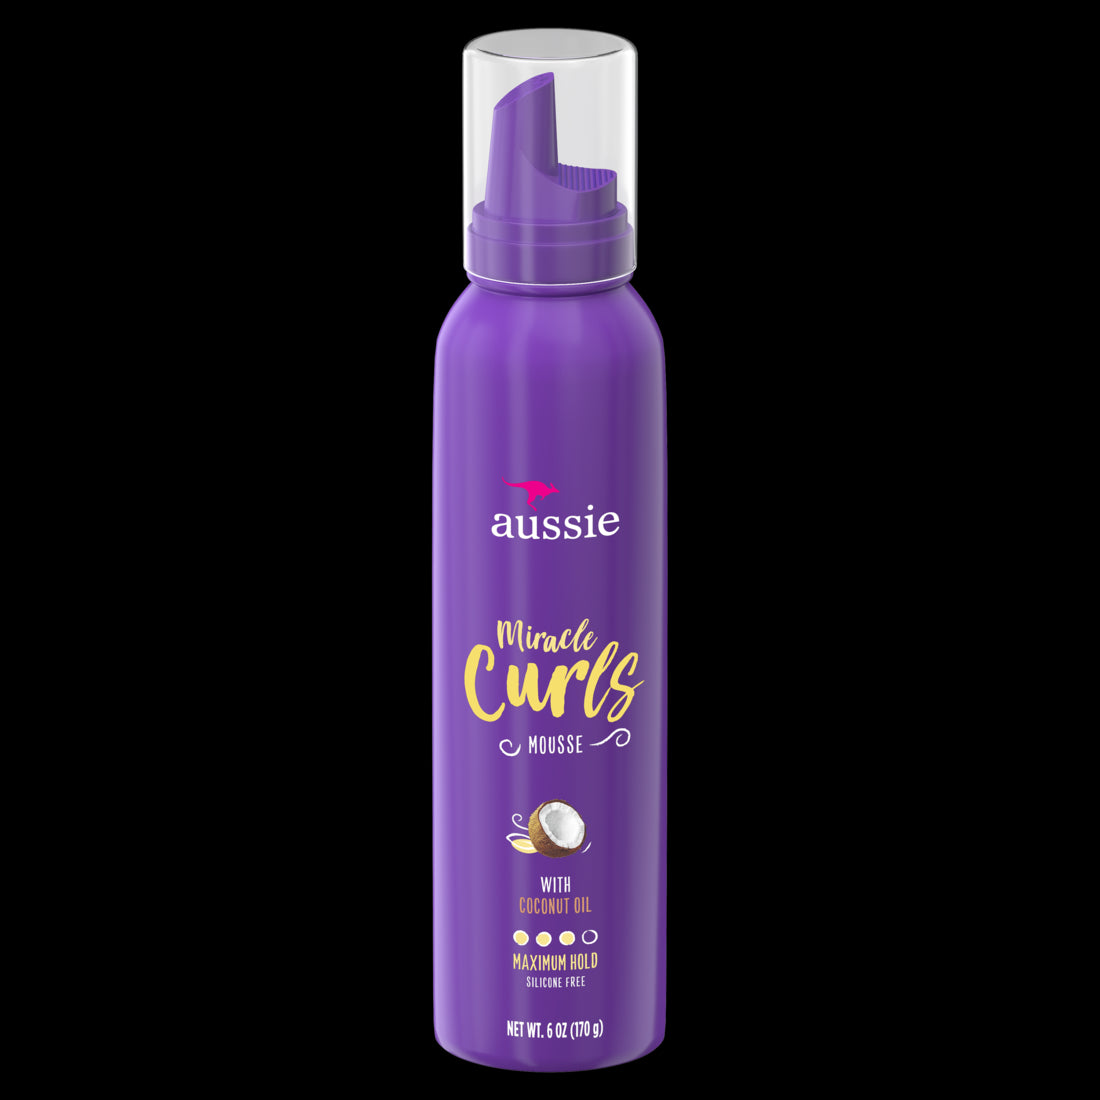 Aussie Miracle Curls Styling Mousse with Coconut & Jojoba Oil - 6oz/12pk